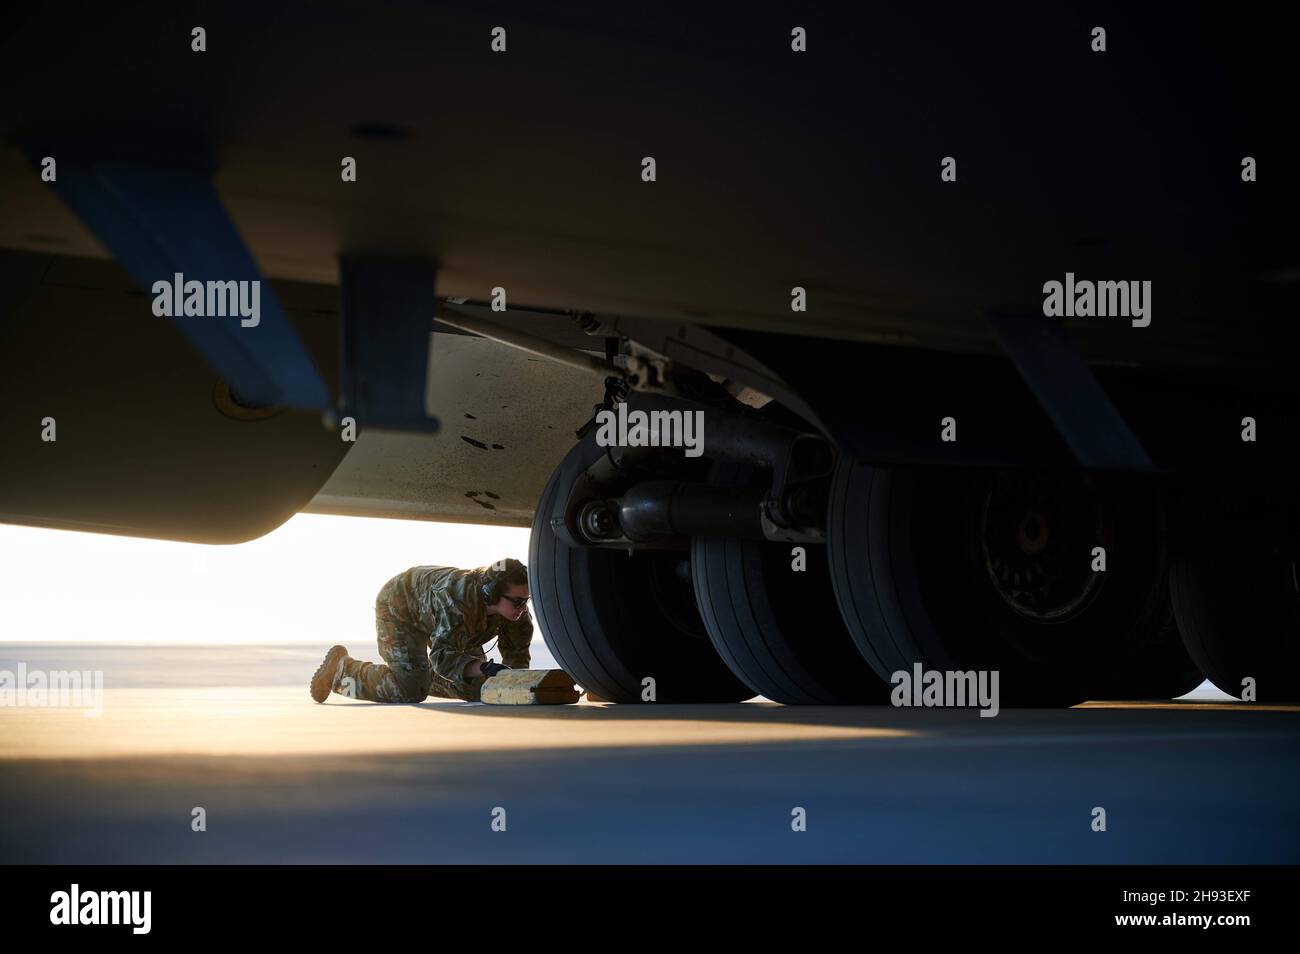 U.S. Air Force Airman 1st Class Cassie Thill, a C-17 Globemaster III aircraft loadmaster assigned to the 816th Expeditionary Airlift Squadron chocks the landing gear of a C-17 Globemaster at Al Dhafra Air Base, United Arab Emirates, Nov. 24, 2021. The 816th EAS, deployed with U.S. Air Forces Central, is responsible for delivering cargo and passengers to U.S. and partner nation forces' bases, providing airpower to U.S. Central Command. (U.S. Air Force photo by Tech. Sgt. Christopher Ruano) Stock Photo